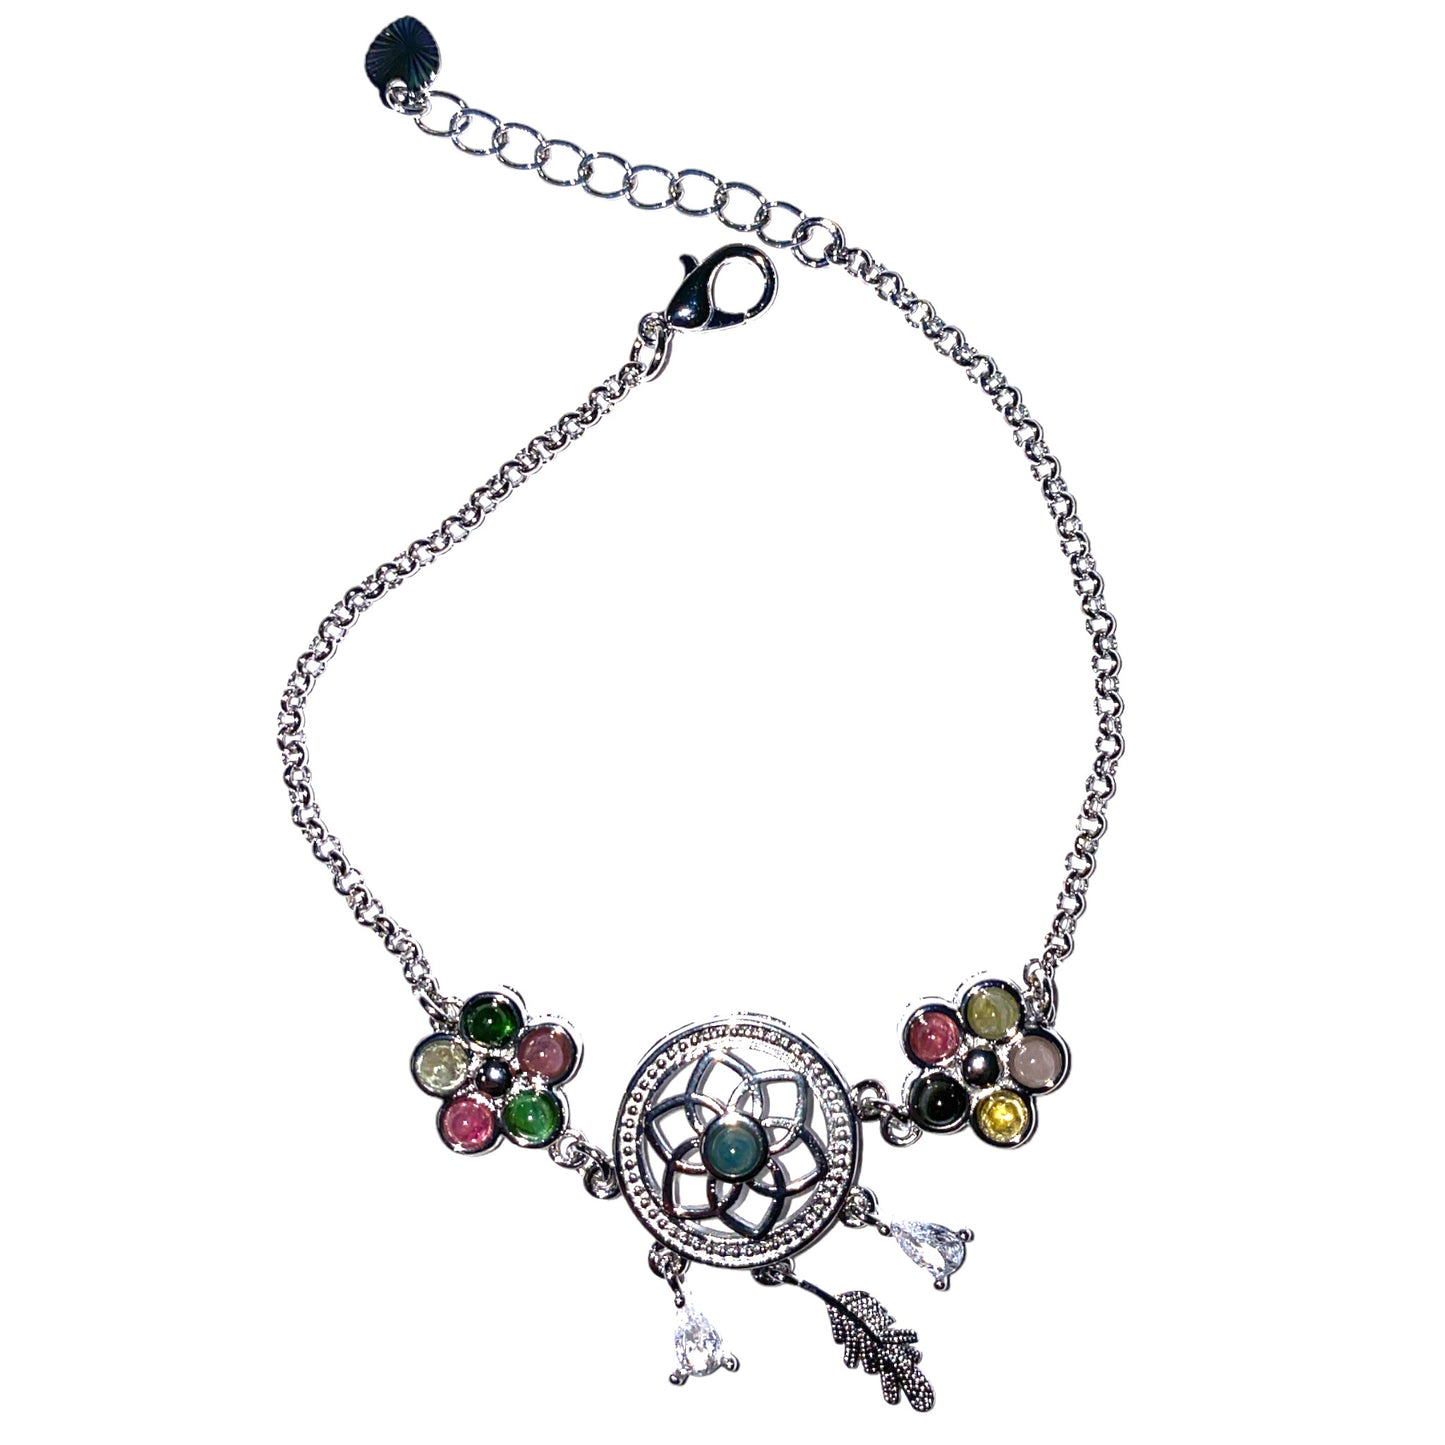 Dream Catcher Tourmaline Bracelet Anklet - 7 inch with 1 inch extender chain - China - NEW423